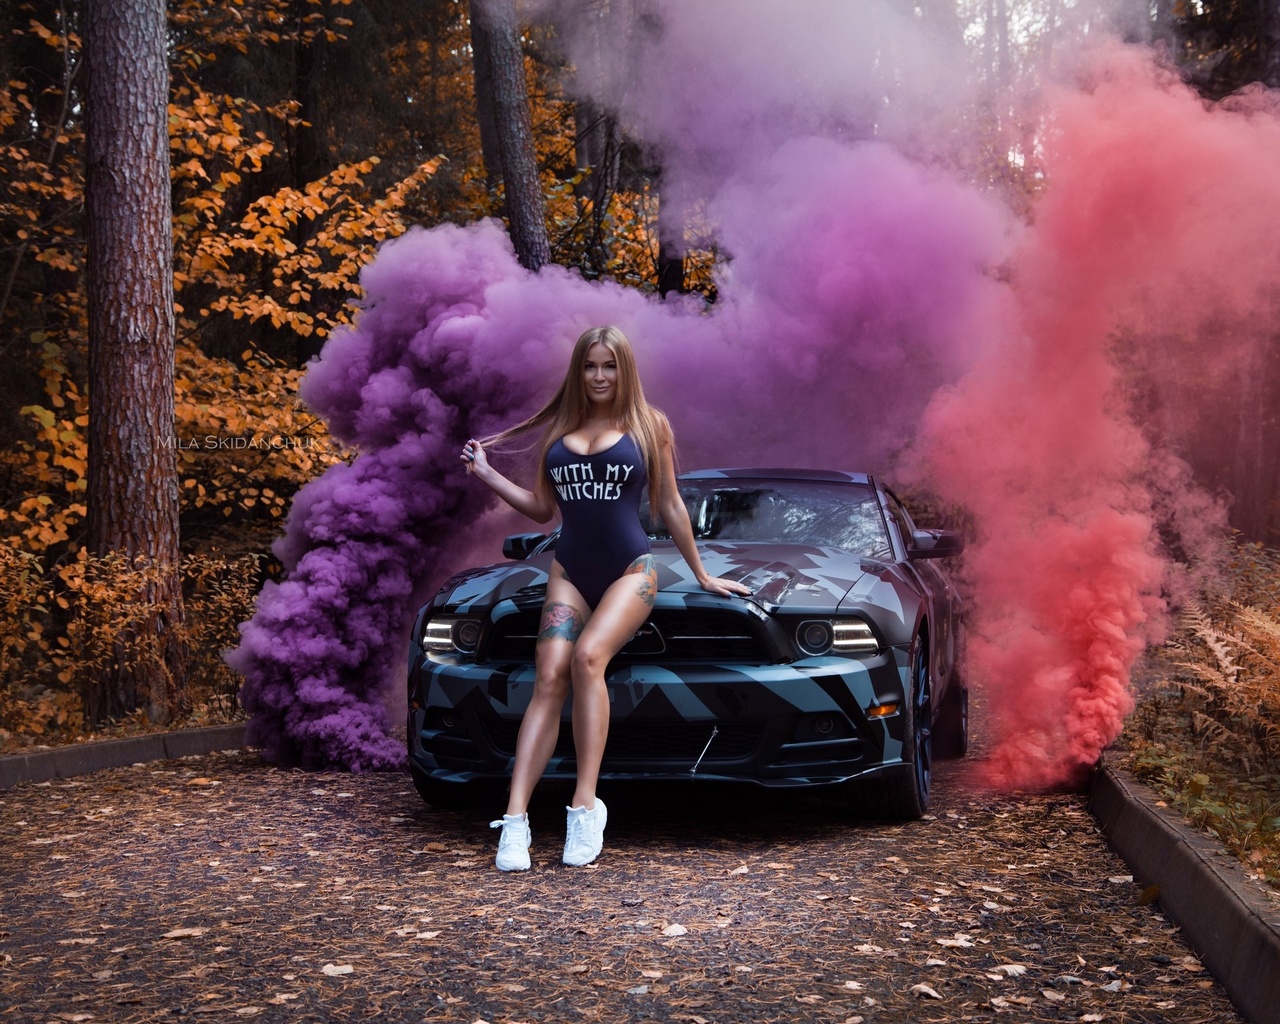 women, monokinis, tanned, tattoo, long hair, smoke, sneakers, women outdoors, women with cars, smiling, painted nails, trees